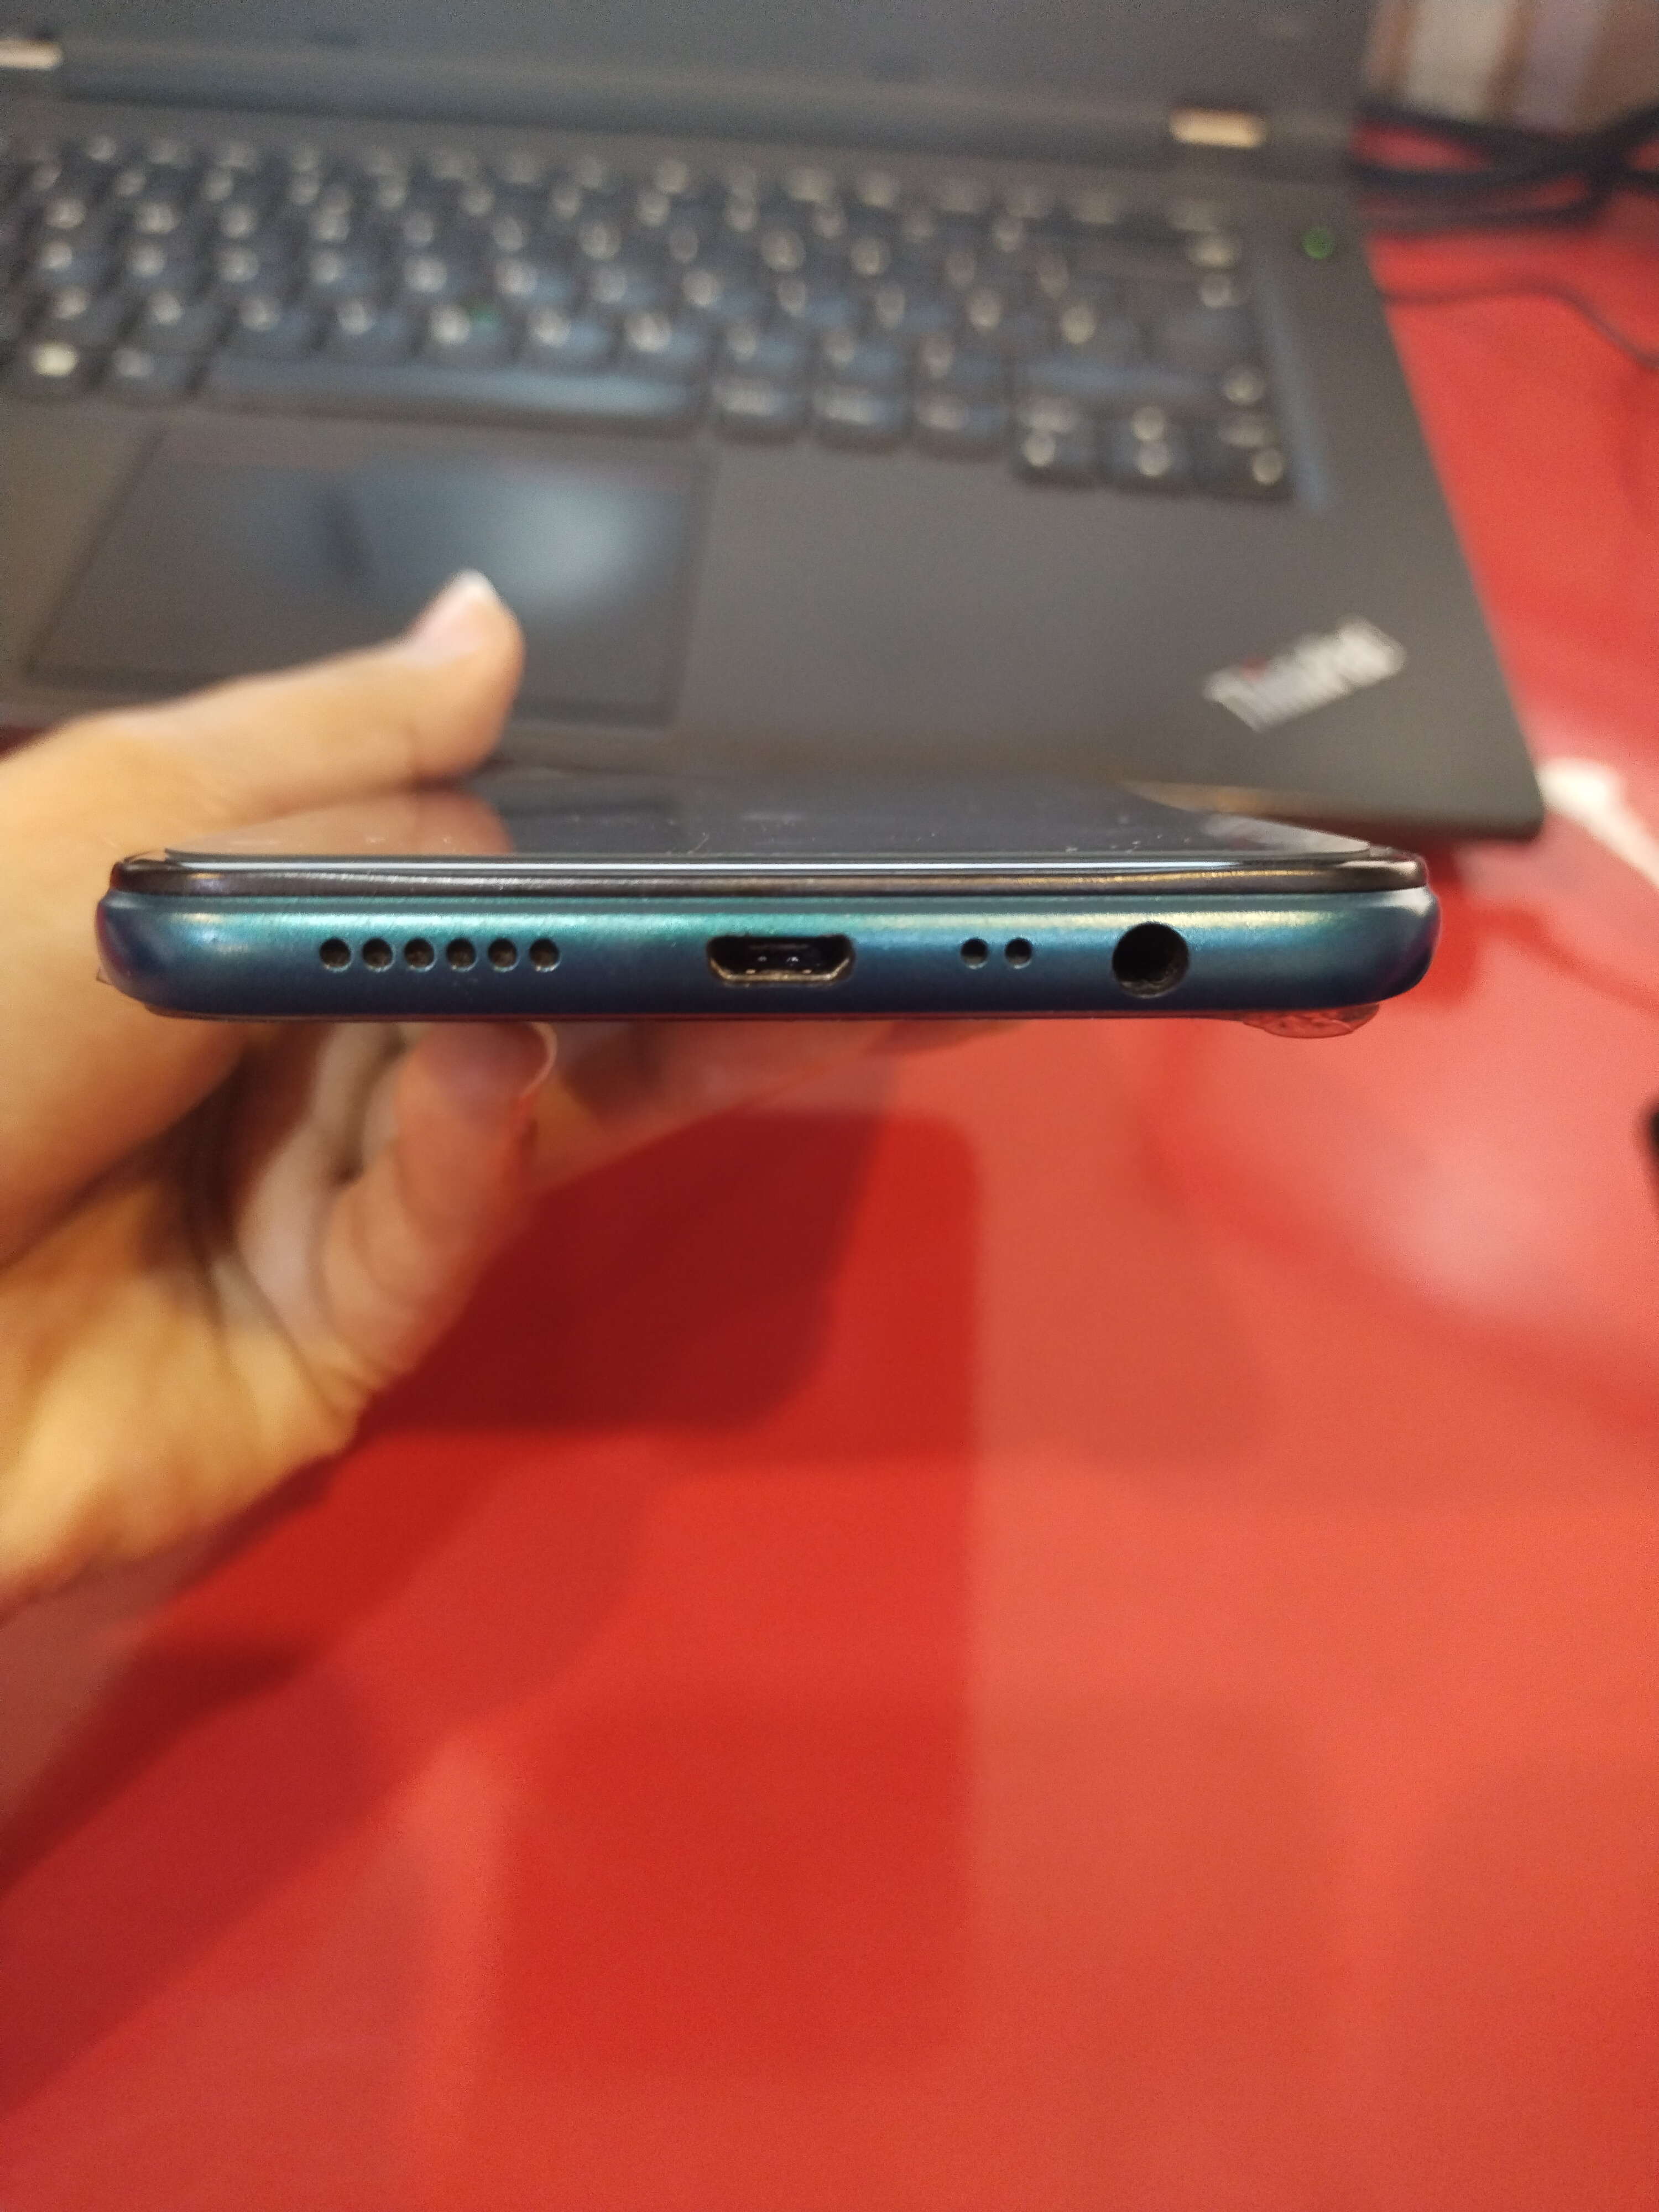 oppo A5s 4/64 - Used but condition is 10/10, not a single defect or scratch